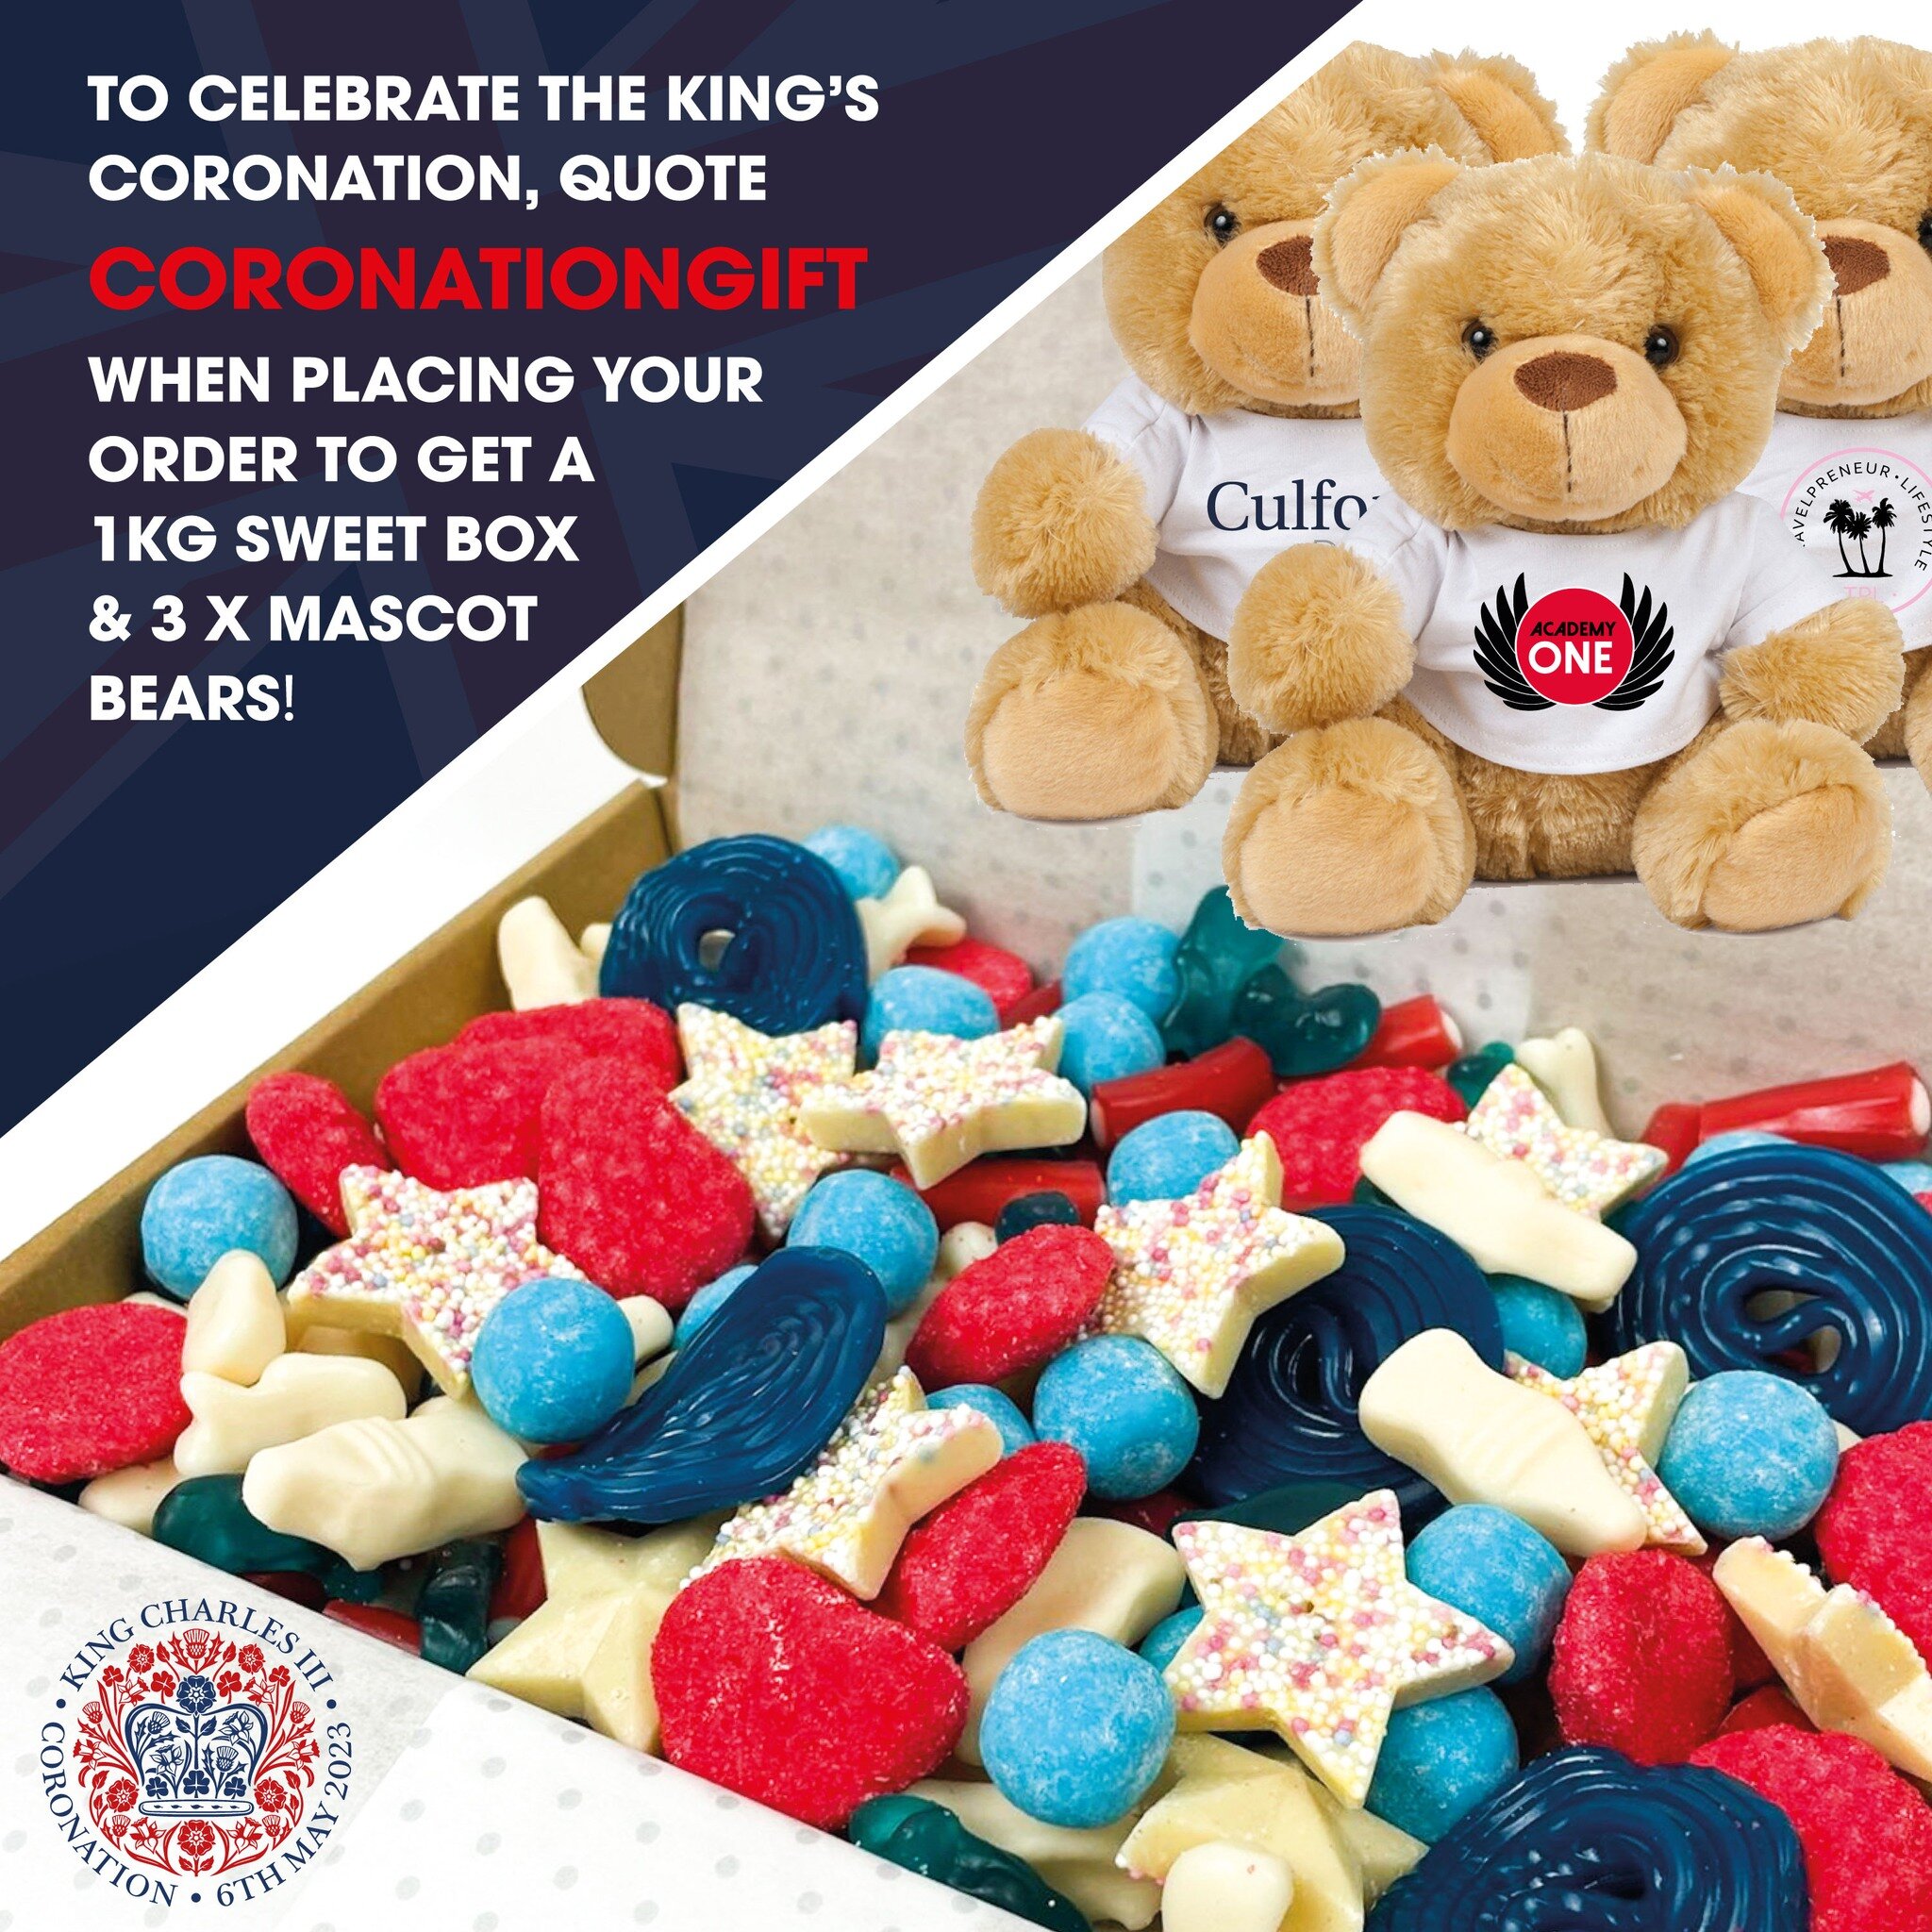 CORONATION OFFER 🇬🇧👑 To celebrate the Kings Coronation Offer, we have a 1KG branded sweet box &amp; 3 x Branded Mascot Bears up for grabs on all orders placed between 4th - 12th May 🤍 Quote code CORONATIONGIFT when placing your order!
.
.
.
#work